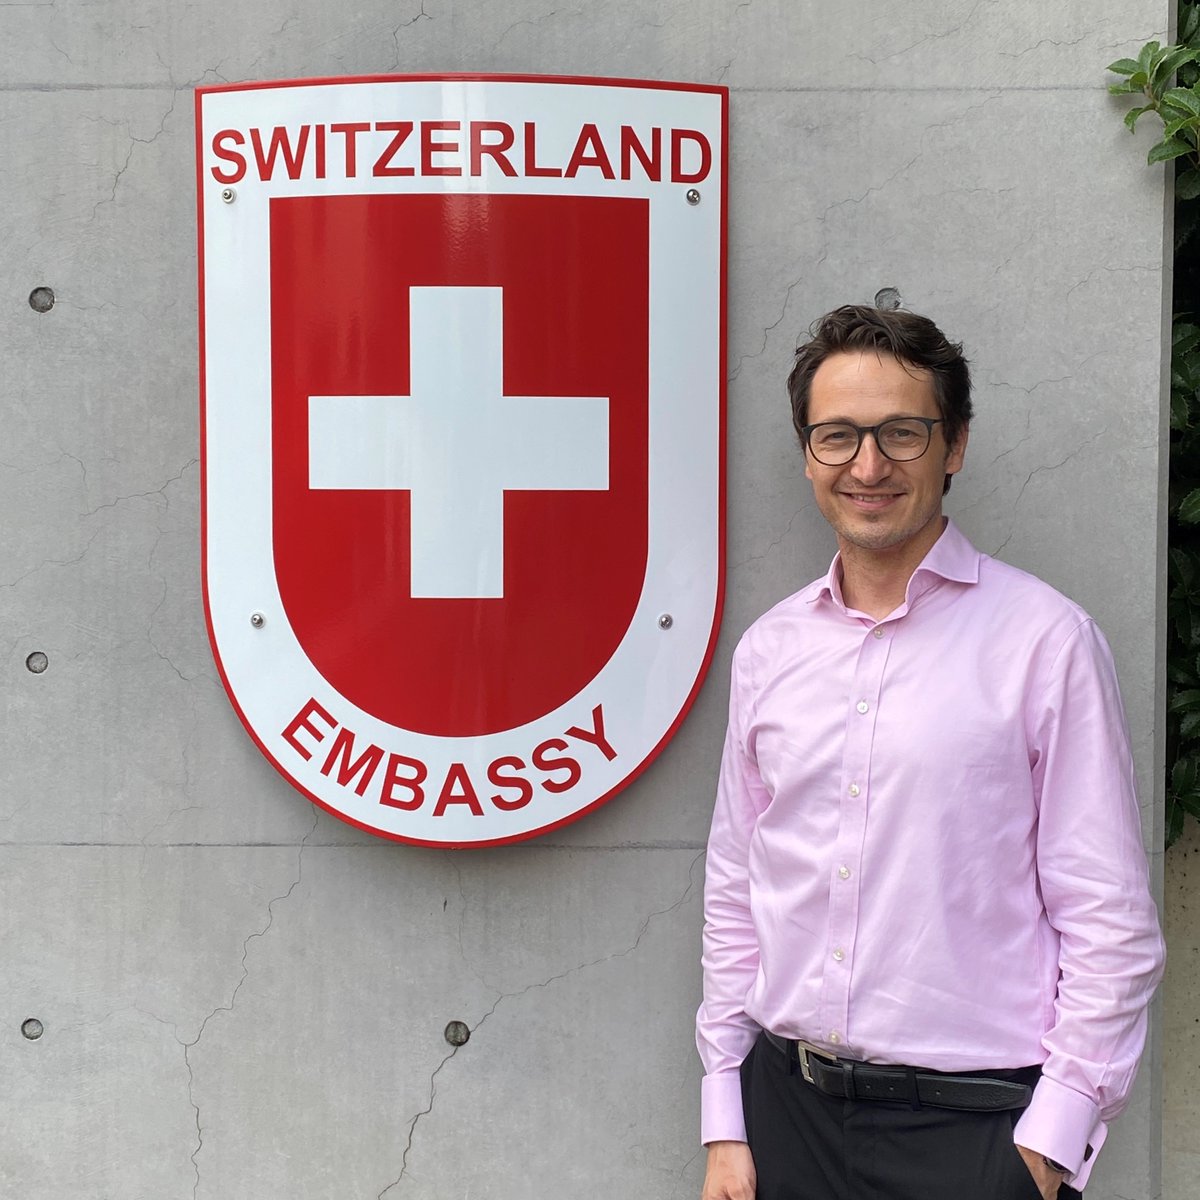 Meet David Braun, who joined the embassy as Deputy Head of Mission this month.  He is excited to be back in Japan 🇯🇵 &  looks forward to promote Swiss-Japanese 🇨🇭🇯🇵 connections #APlus4Peace #VitalitySwiss #Osaka 2025. We wish him a successful start!